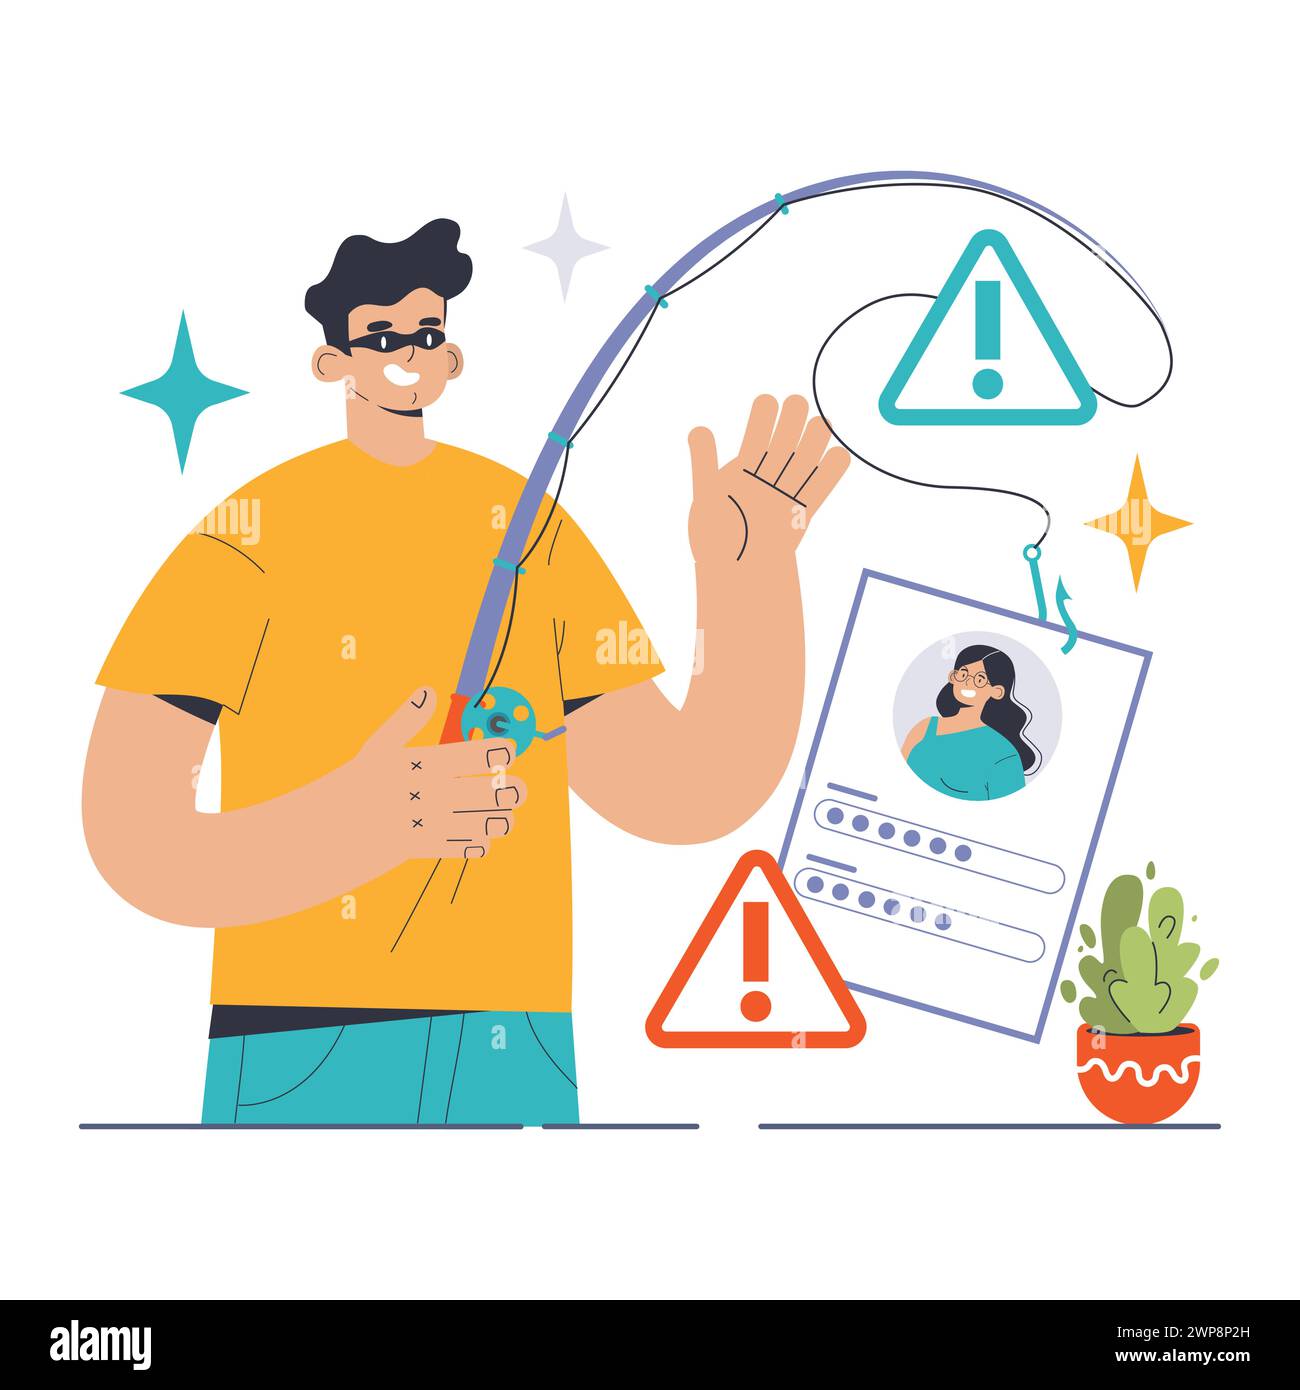 Phishing scam unveiled. Man discerns deceptive email trap, illustrated by fishing rod luring a digital profile. Beware of cyber deception. Flat vector illustration. Stock Vector